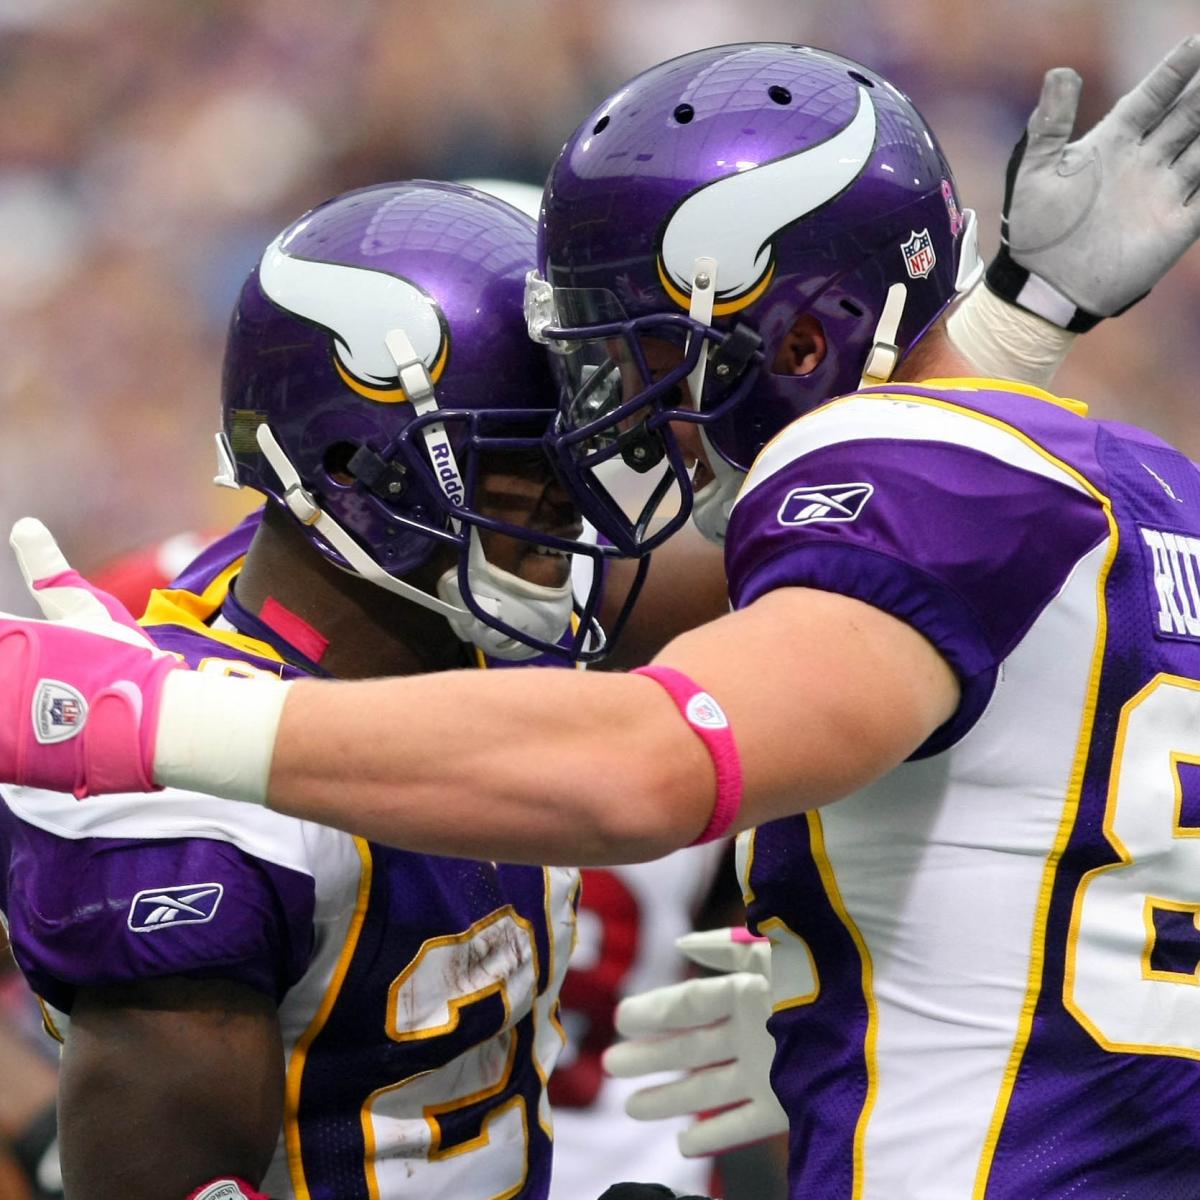 Full Week 3 Stat Projections for 5 Minnesota Vikings Offensive Players